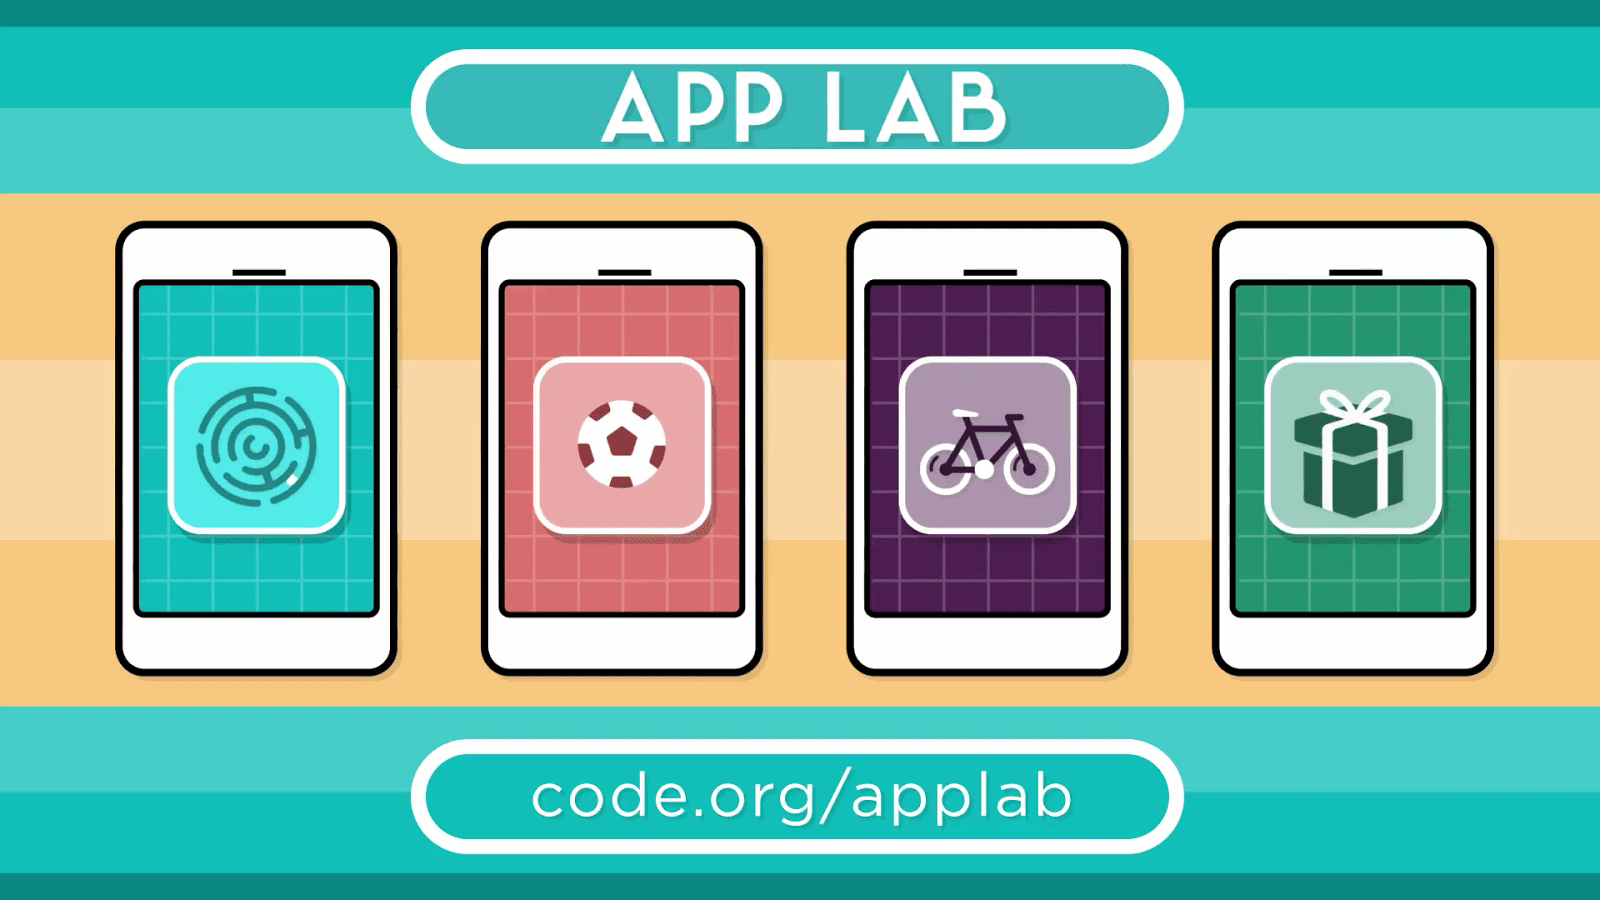 Code.org staging - Intro to App Lab